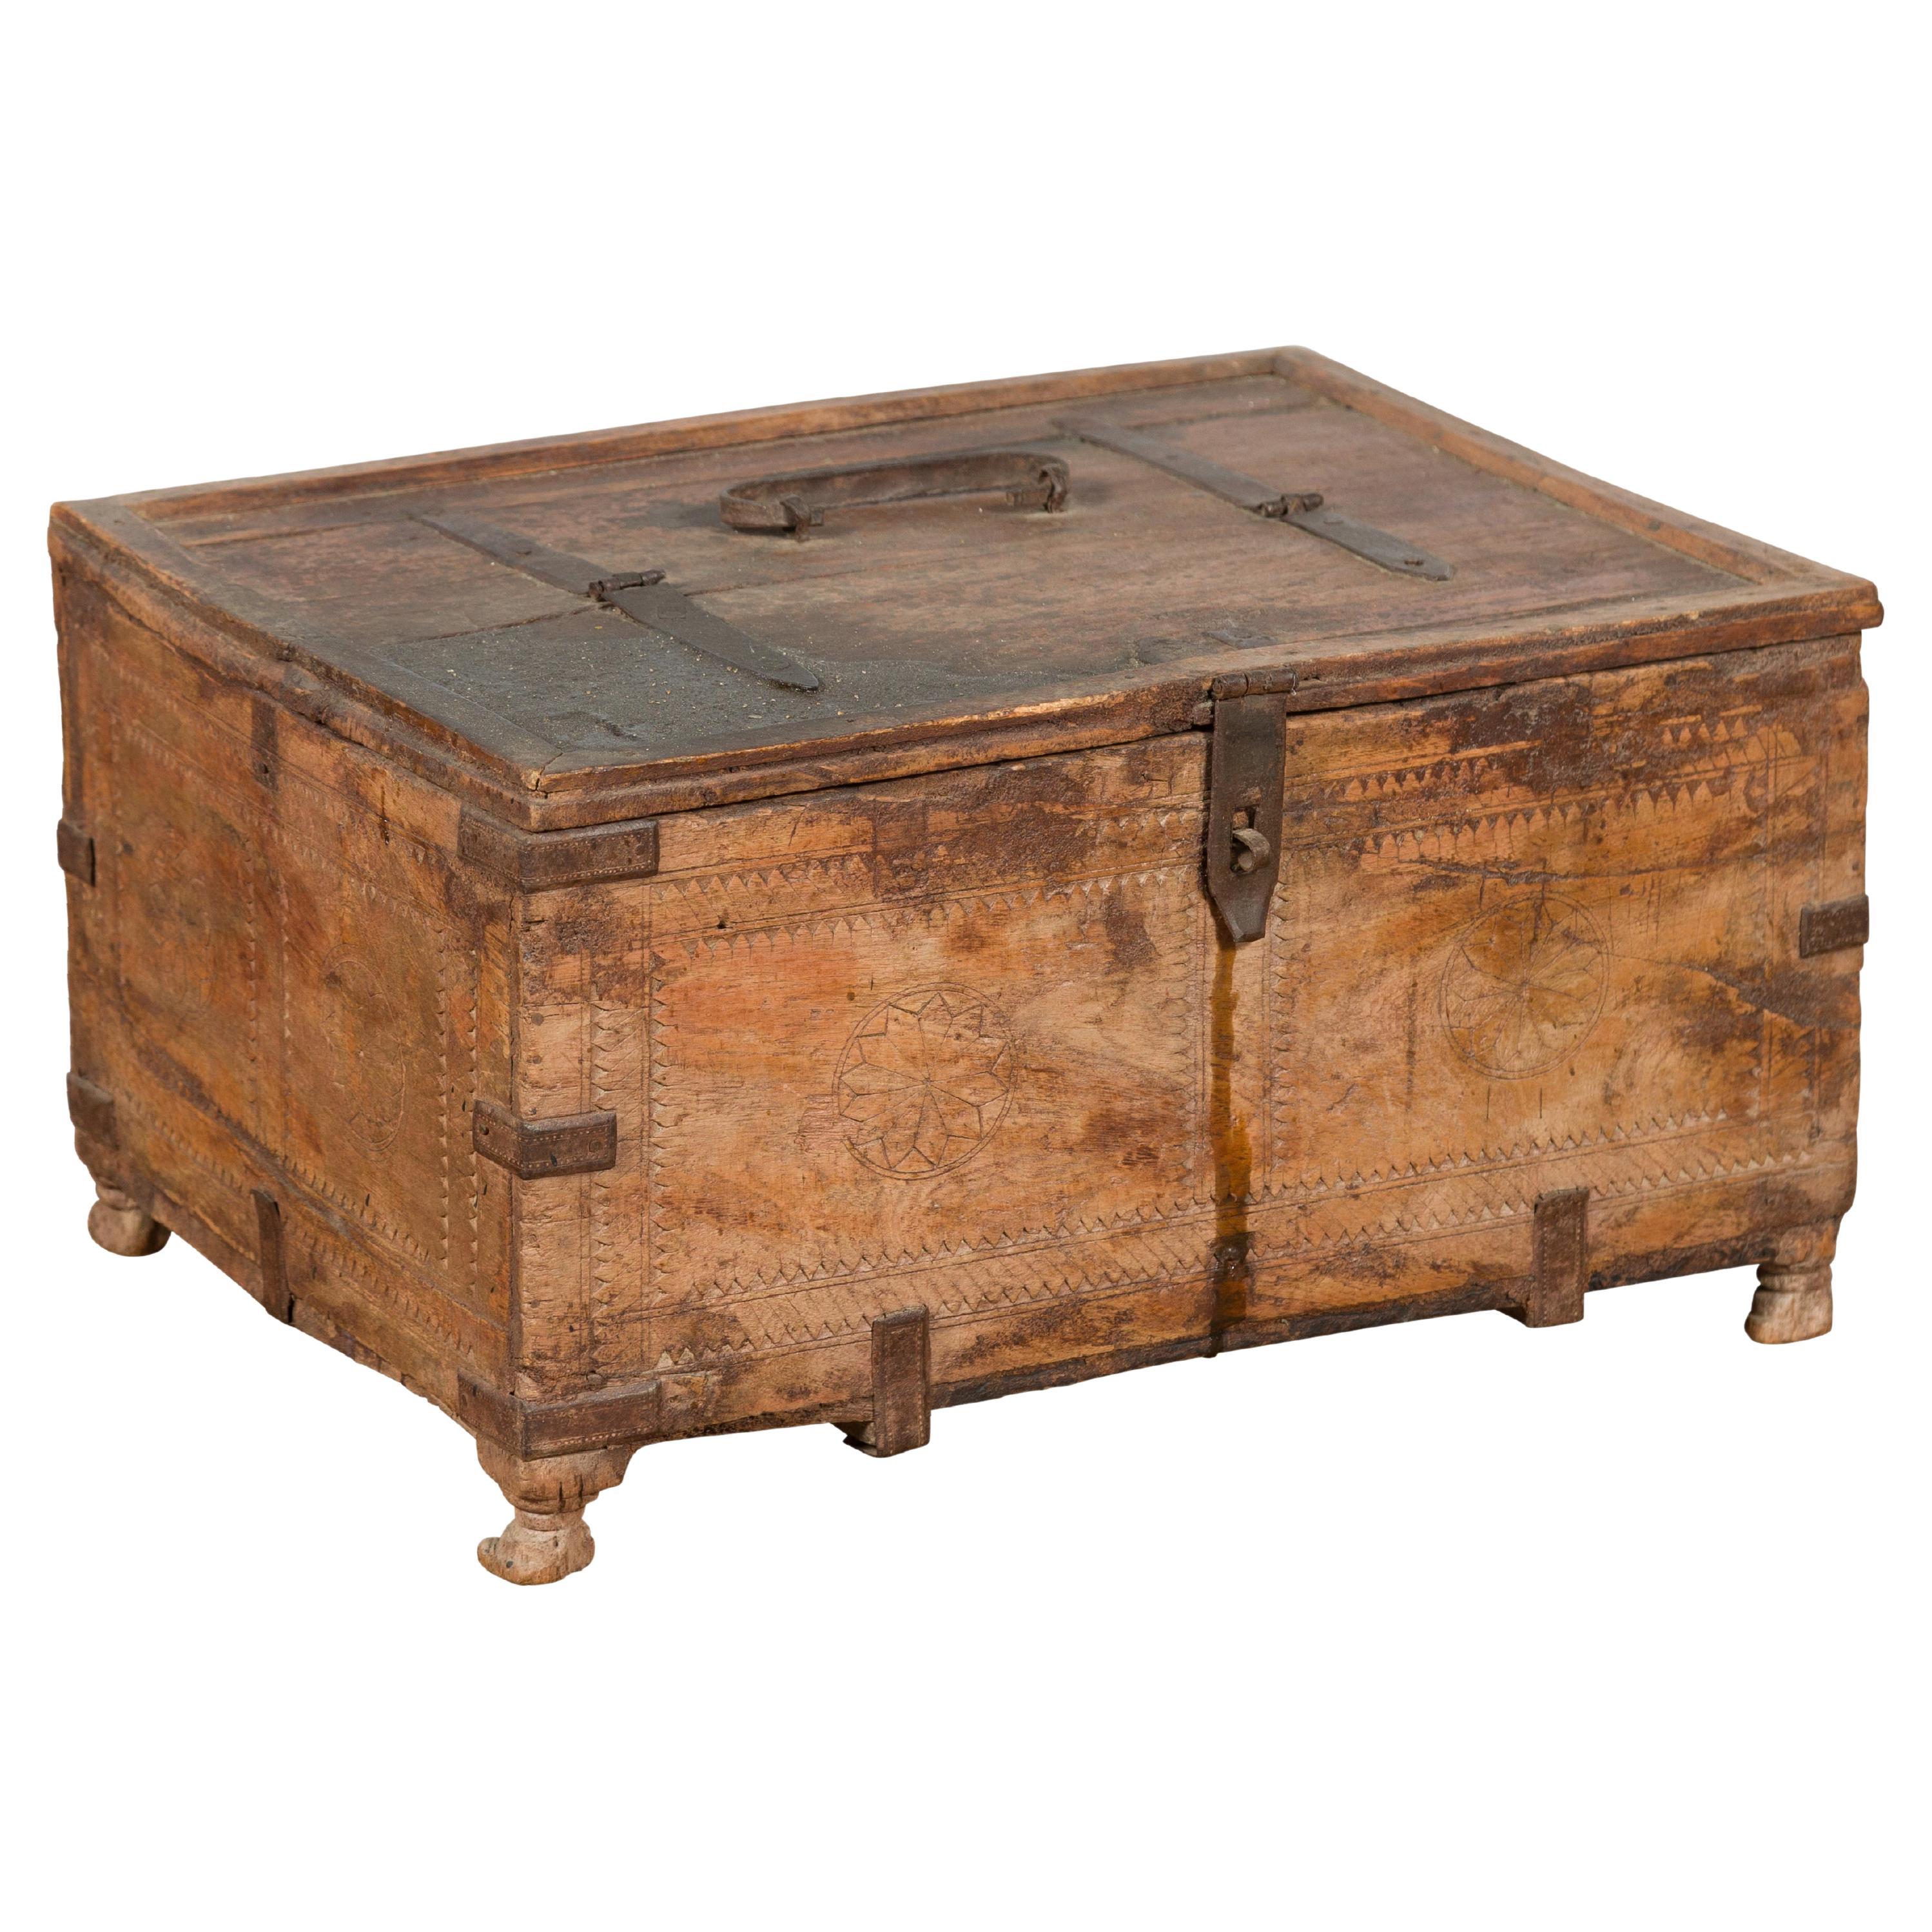 Rustic Indian 19th Century Treasure Box with Carved Rosettes and Small Feet For Sale